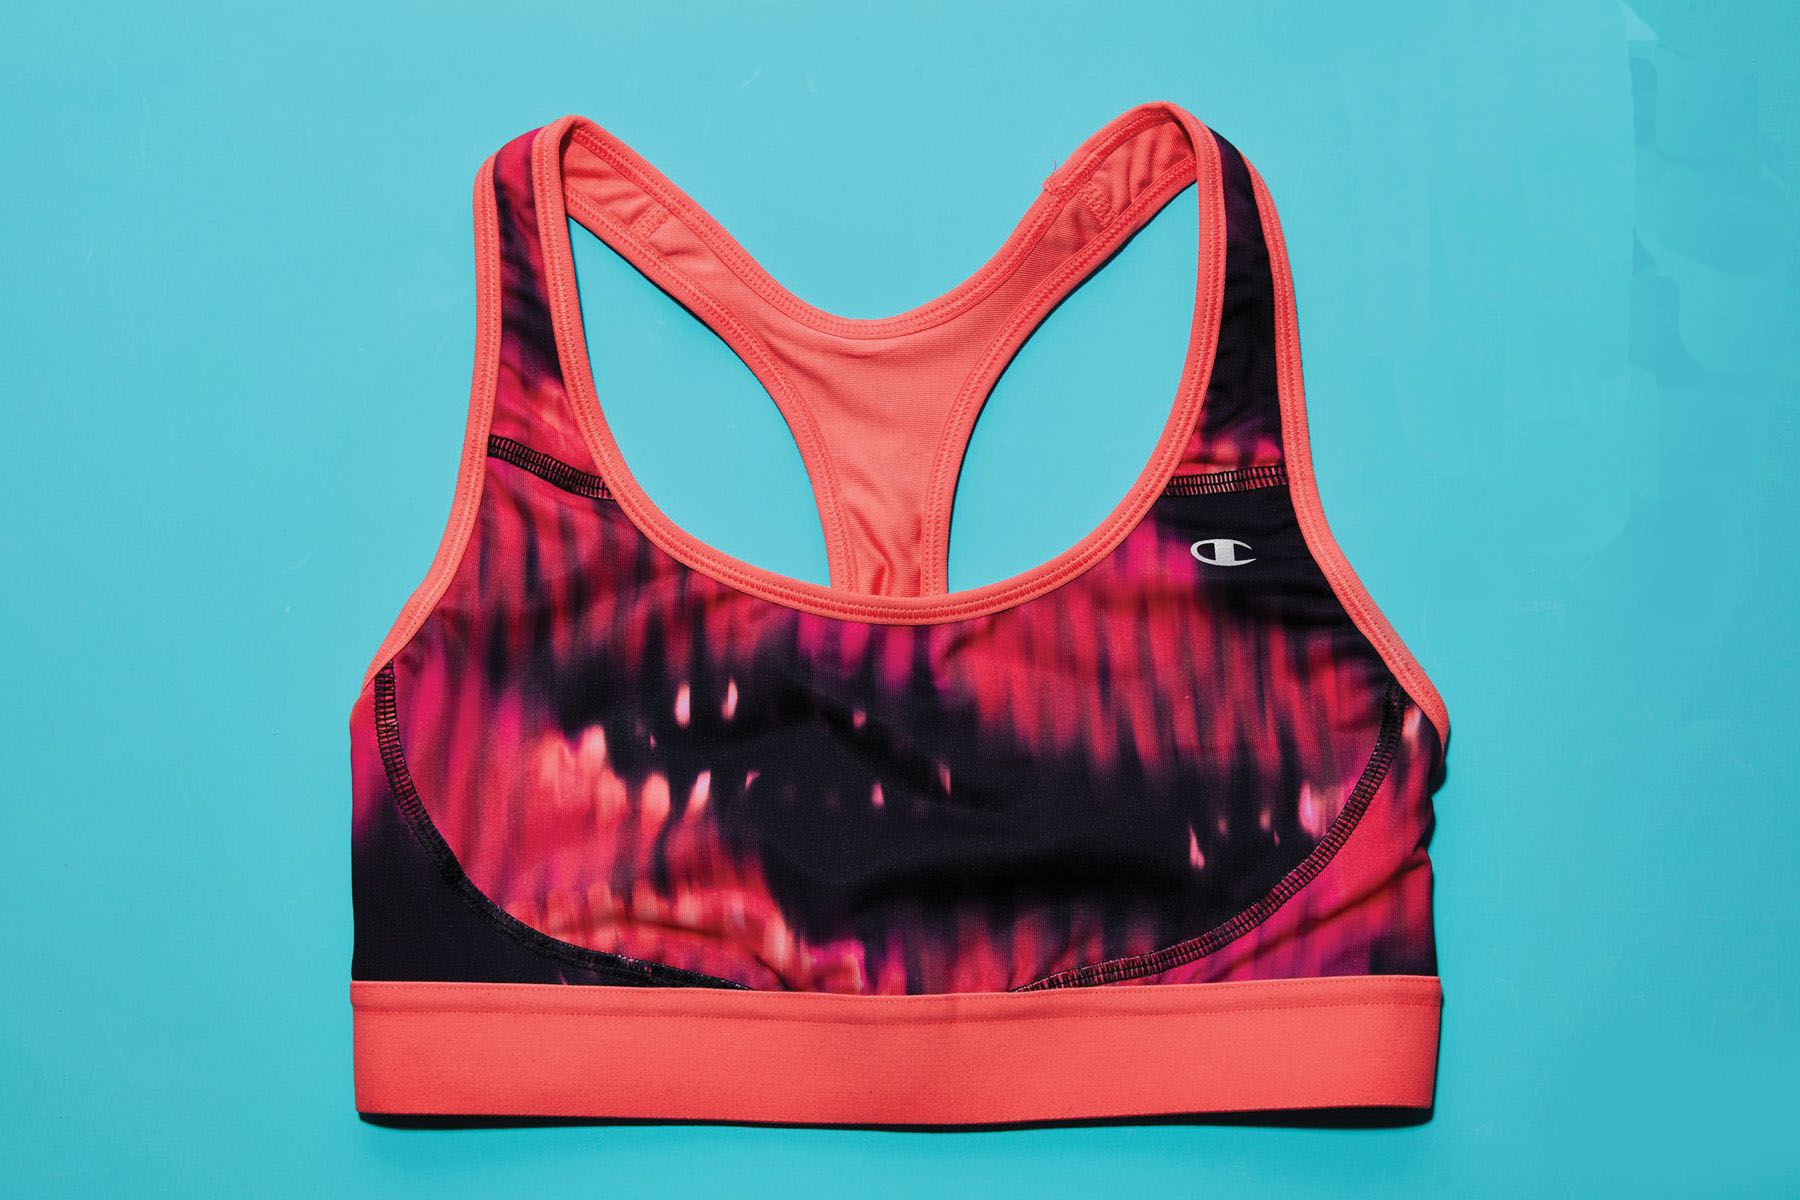 Madison I stor skala skygge Champion Sports Bra Review | Cheap Sports Bras for Runners